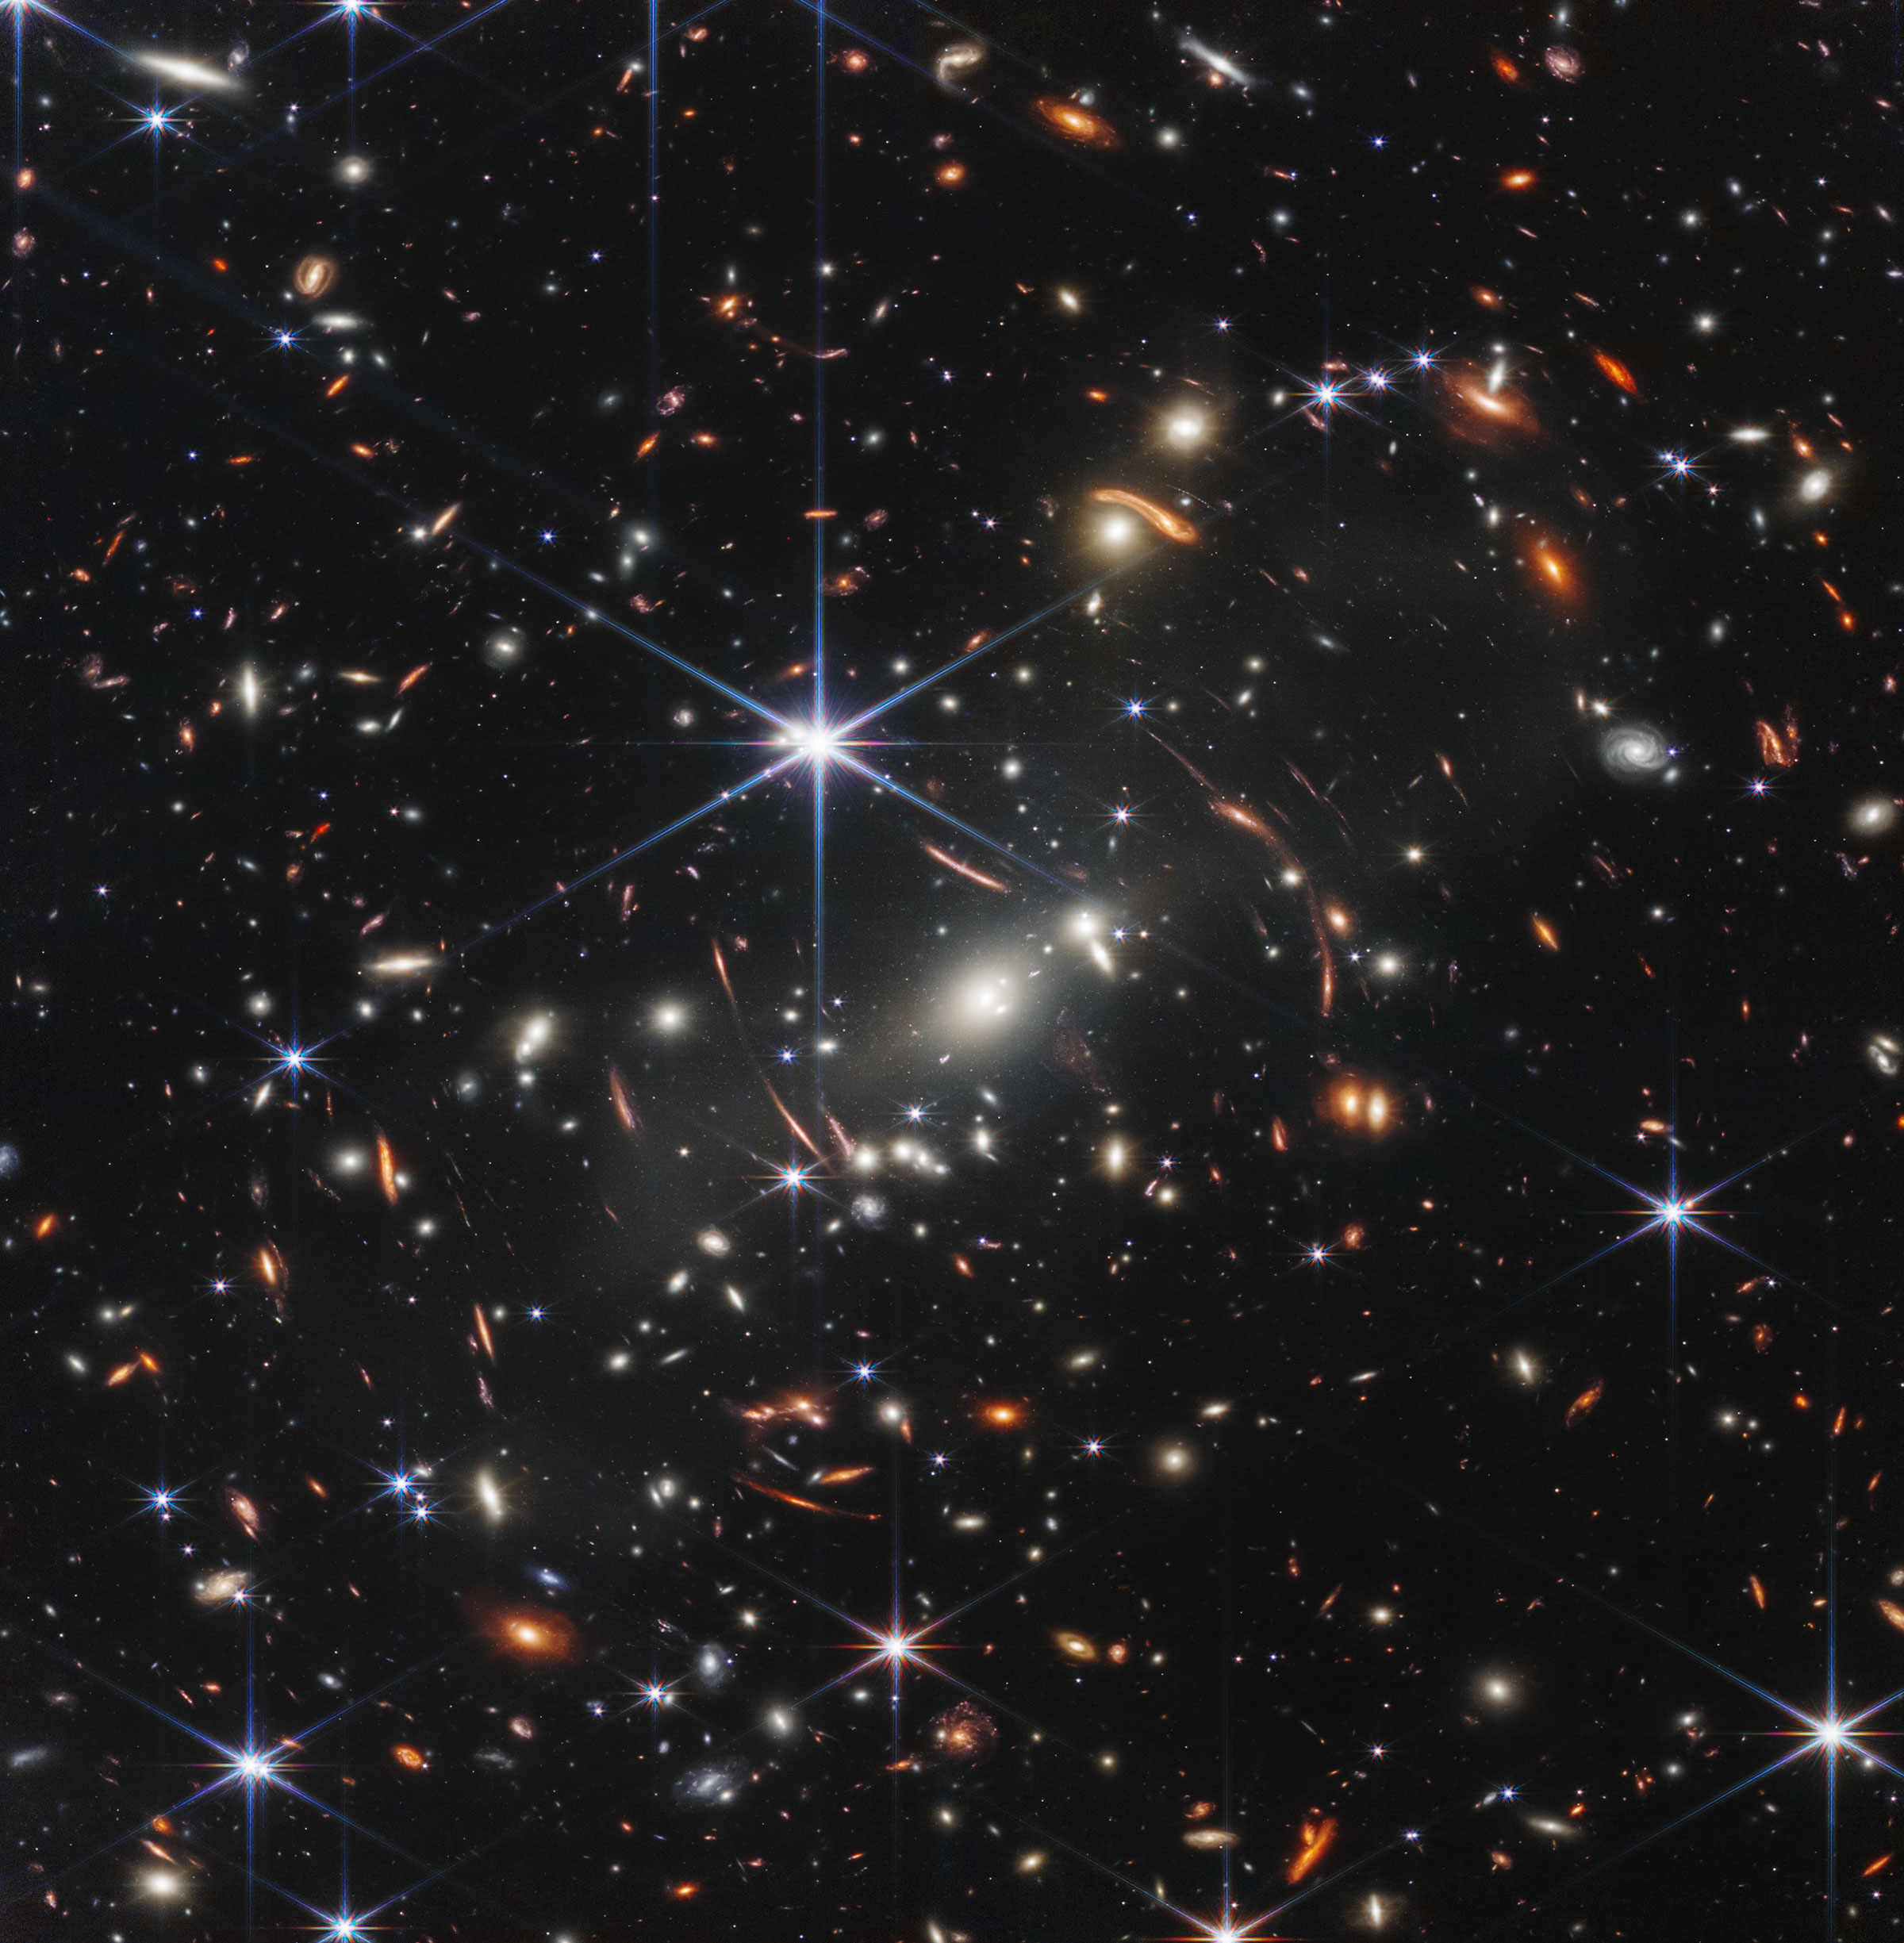 One of the first images from NASA’s James Webb Space Telescope showing galaxy cluster SMACS 0723.